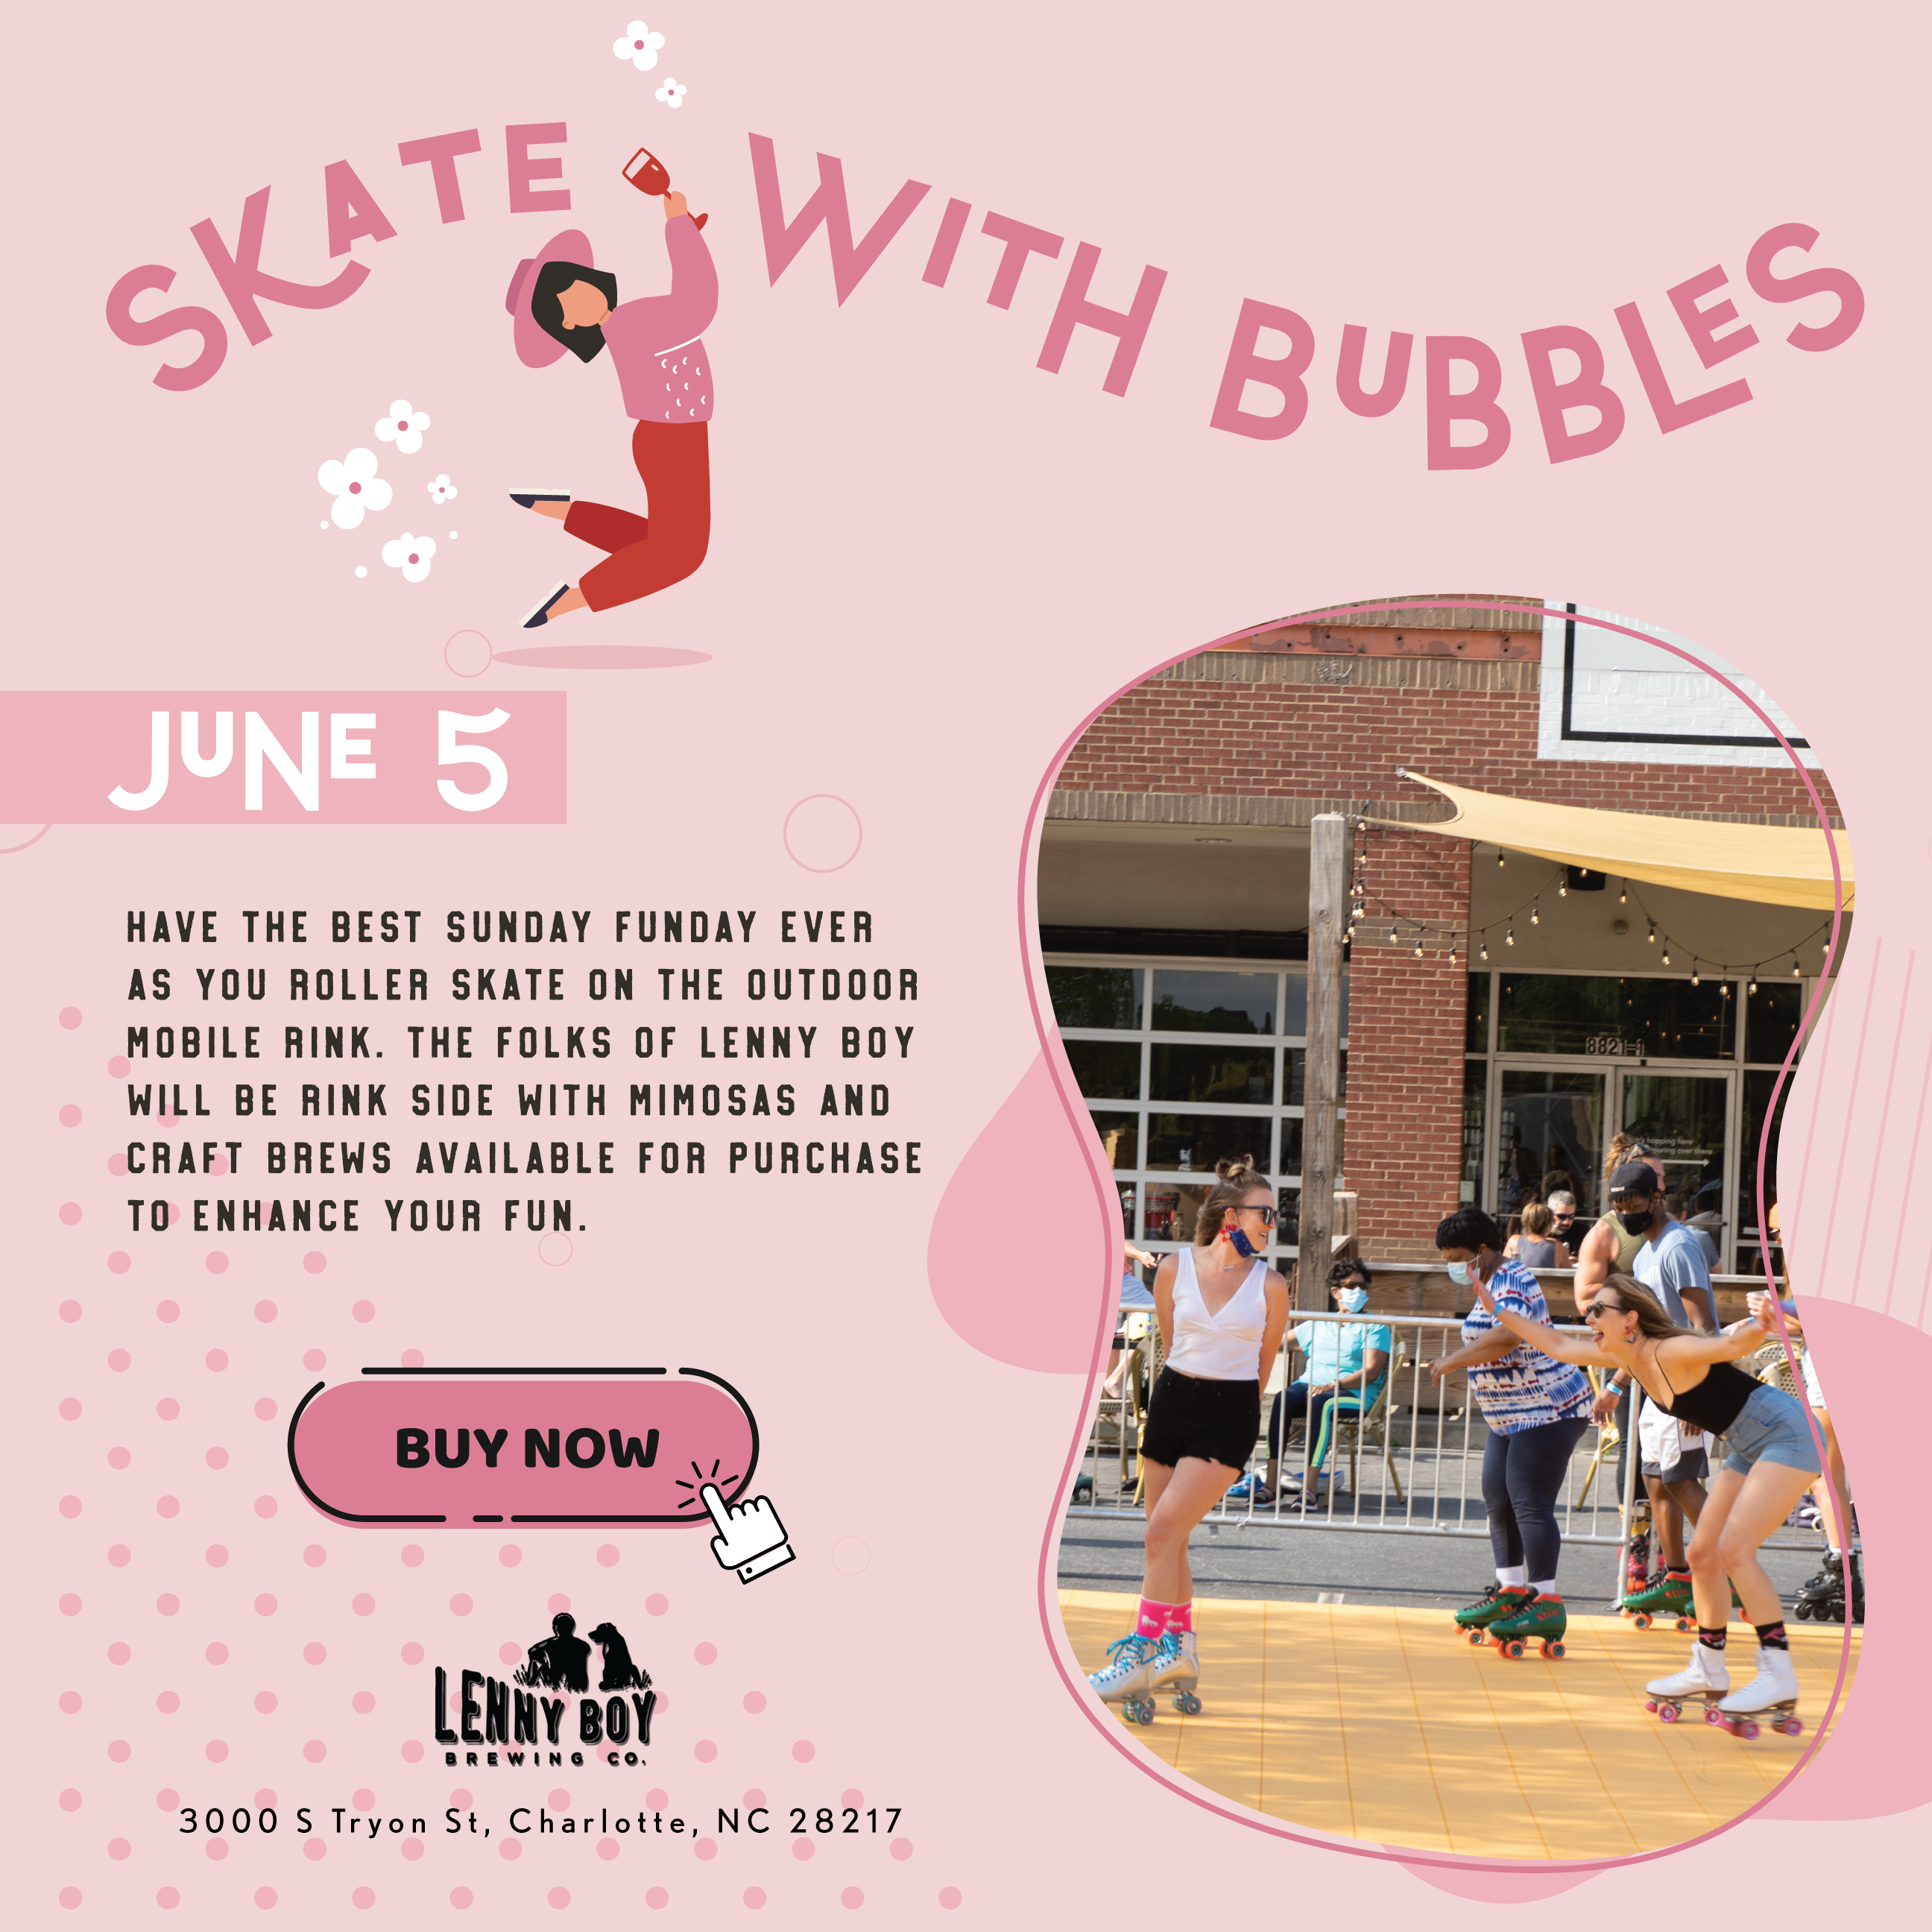 Spring South End Wine & Hops Fest - Skate with Bubbles